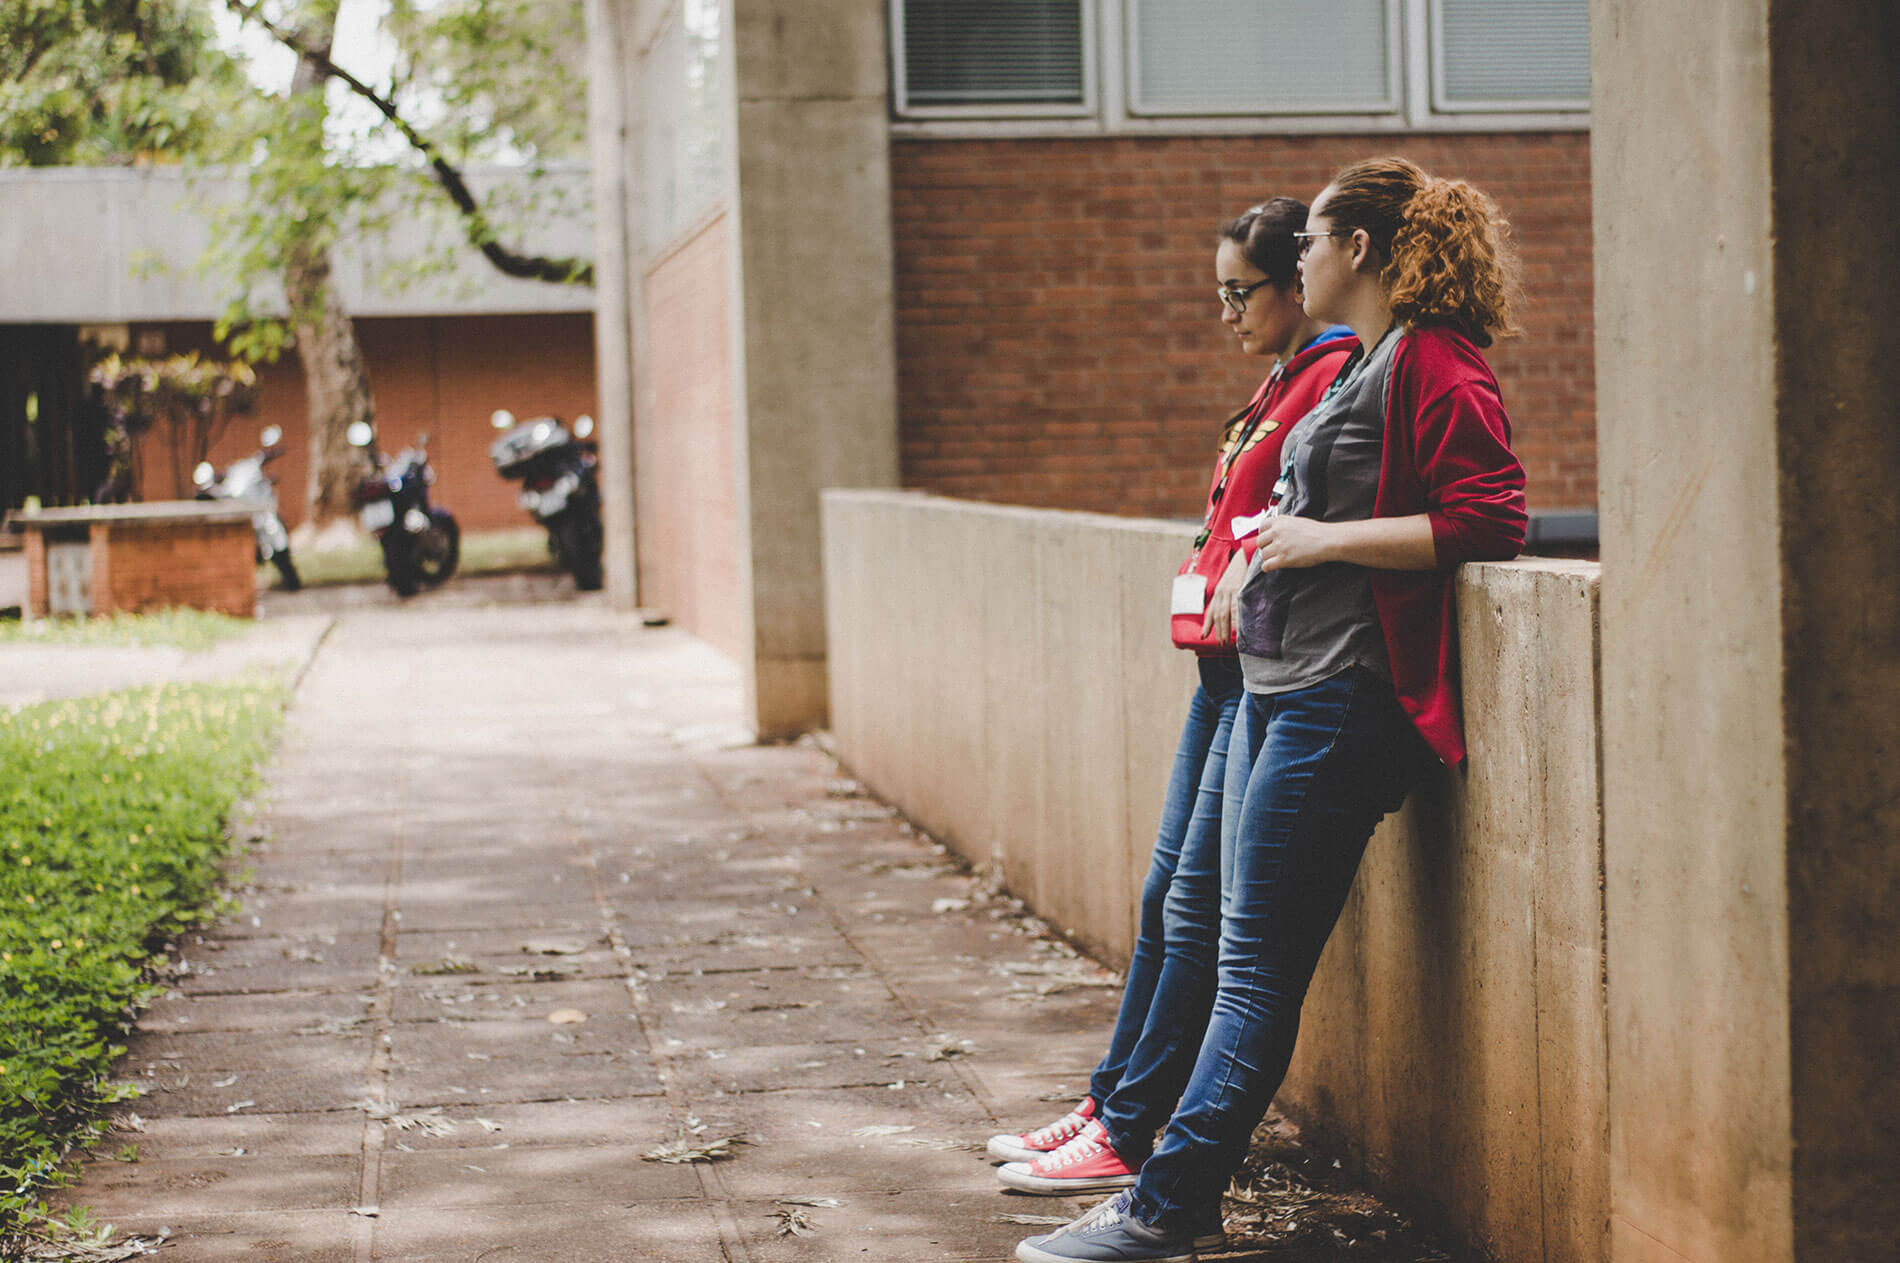 Two people leaning against a wall outdoors, engaged in conversation.